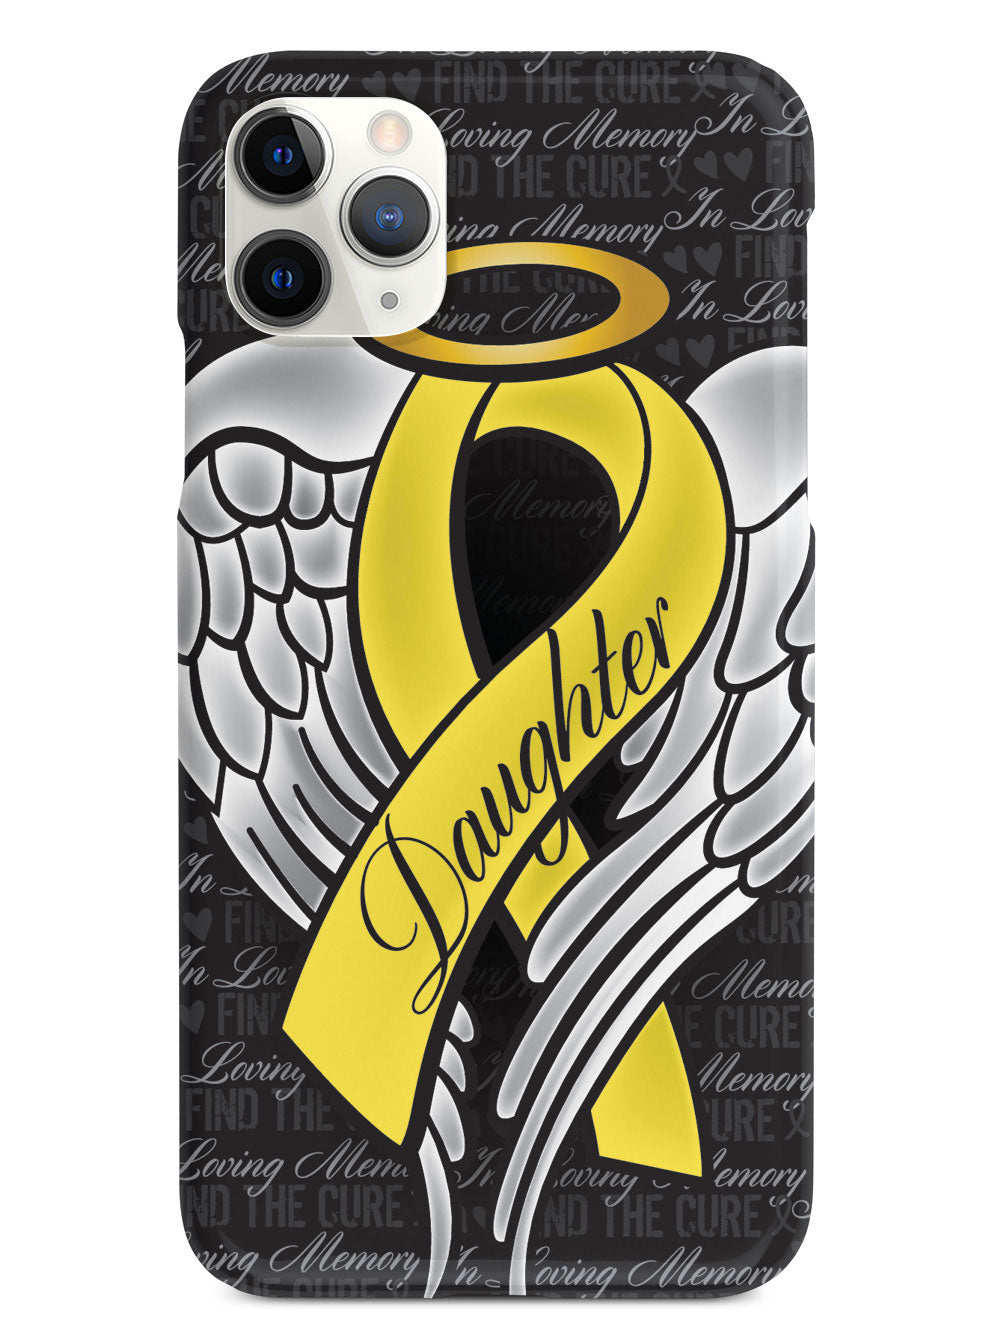 In Loving Memory of My Daughter - Yellow Ribbon Case